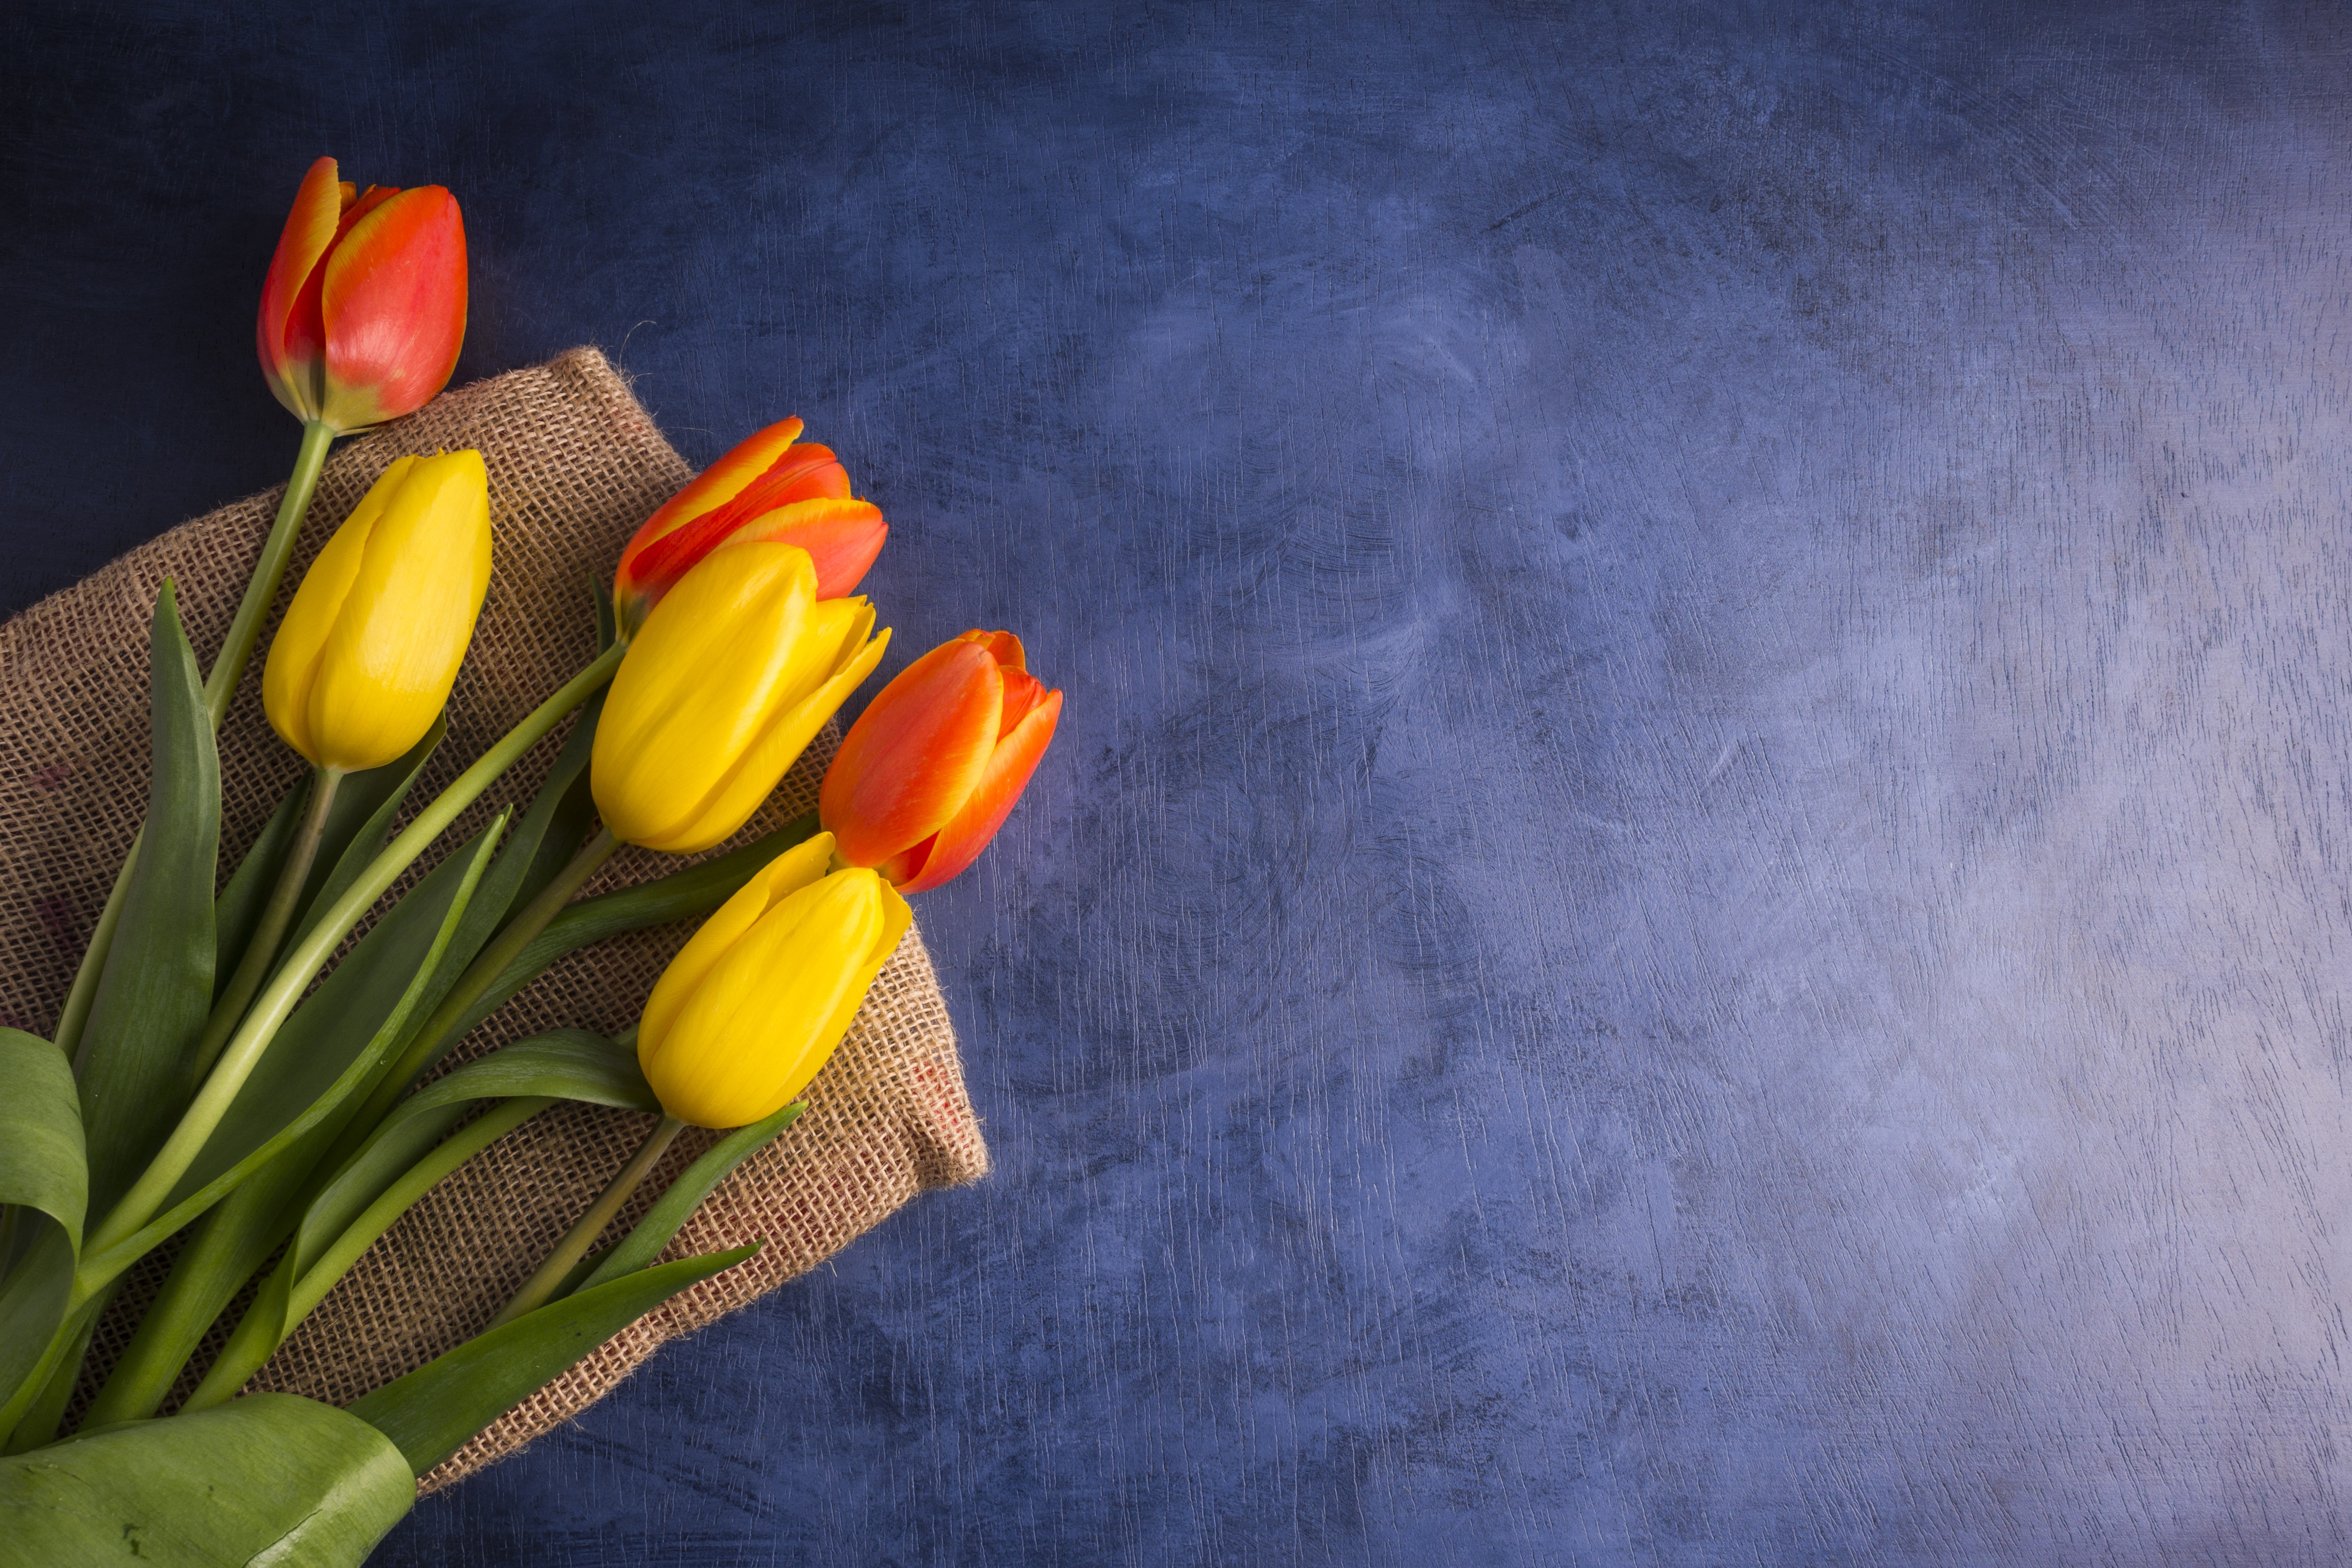 General 4608x3072 flowers tulips plants yellow flowers simple background closeup